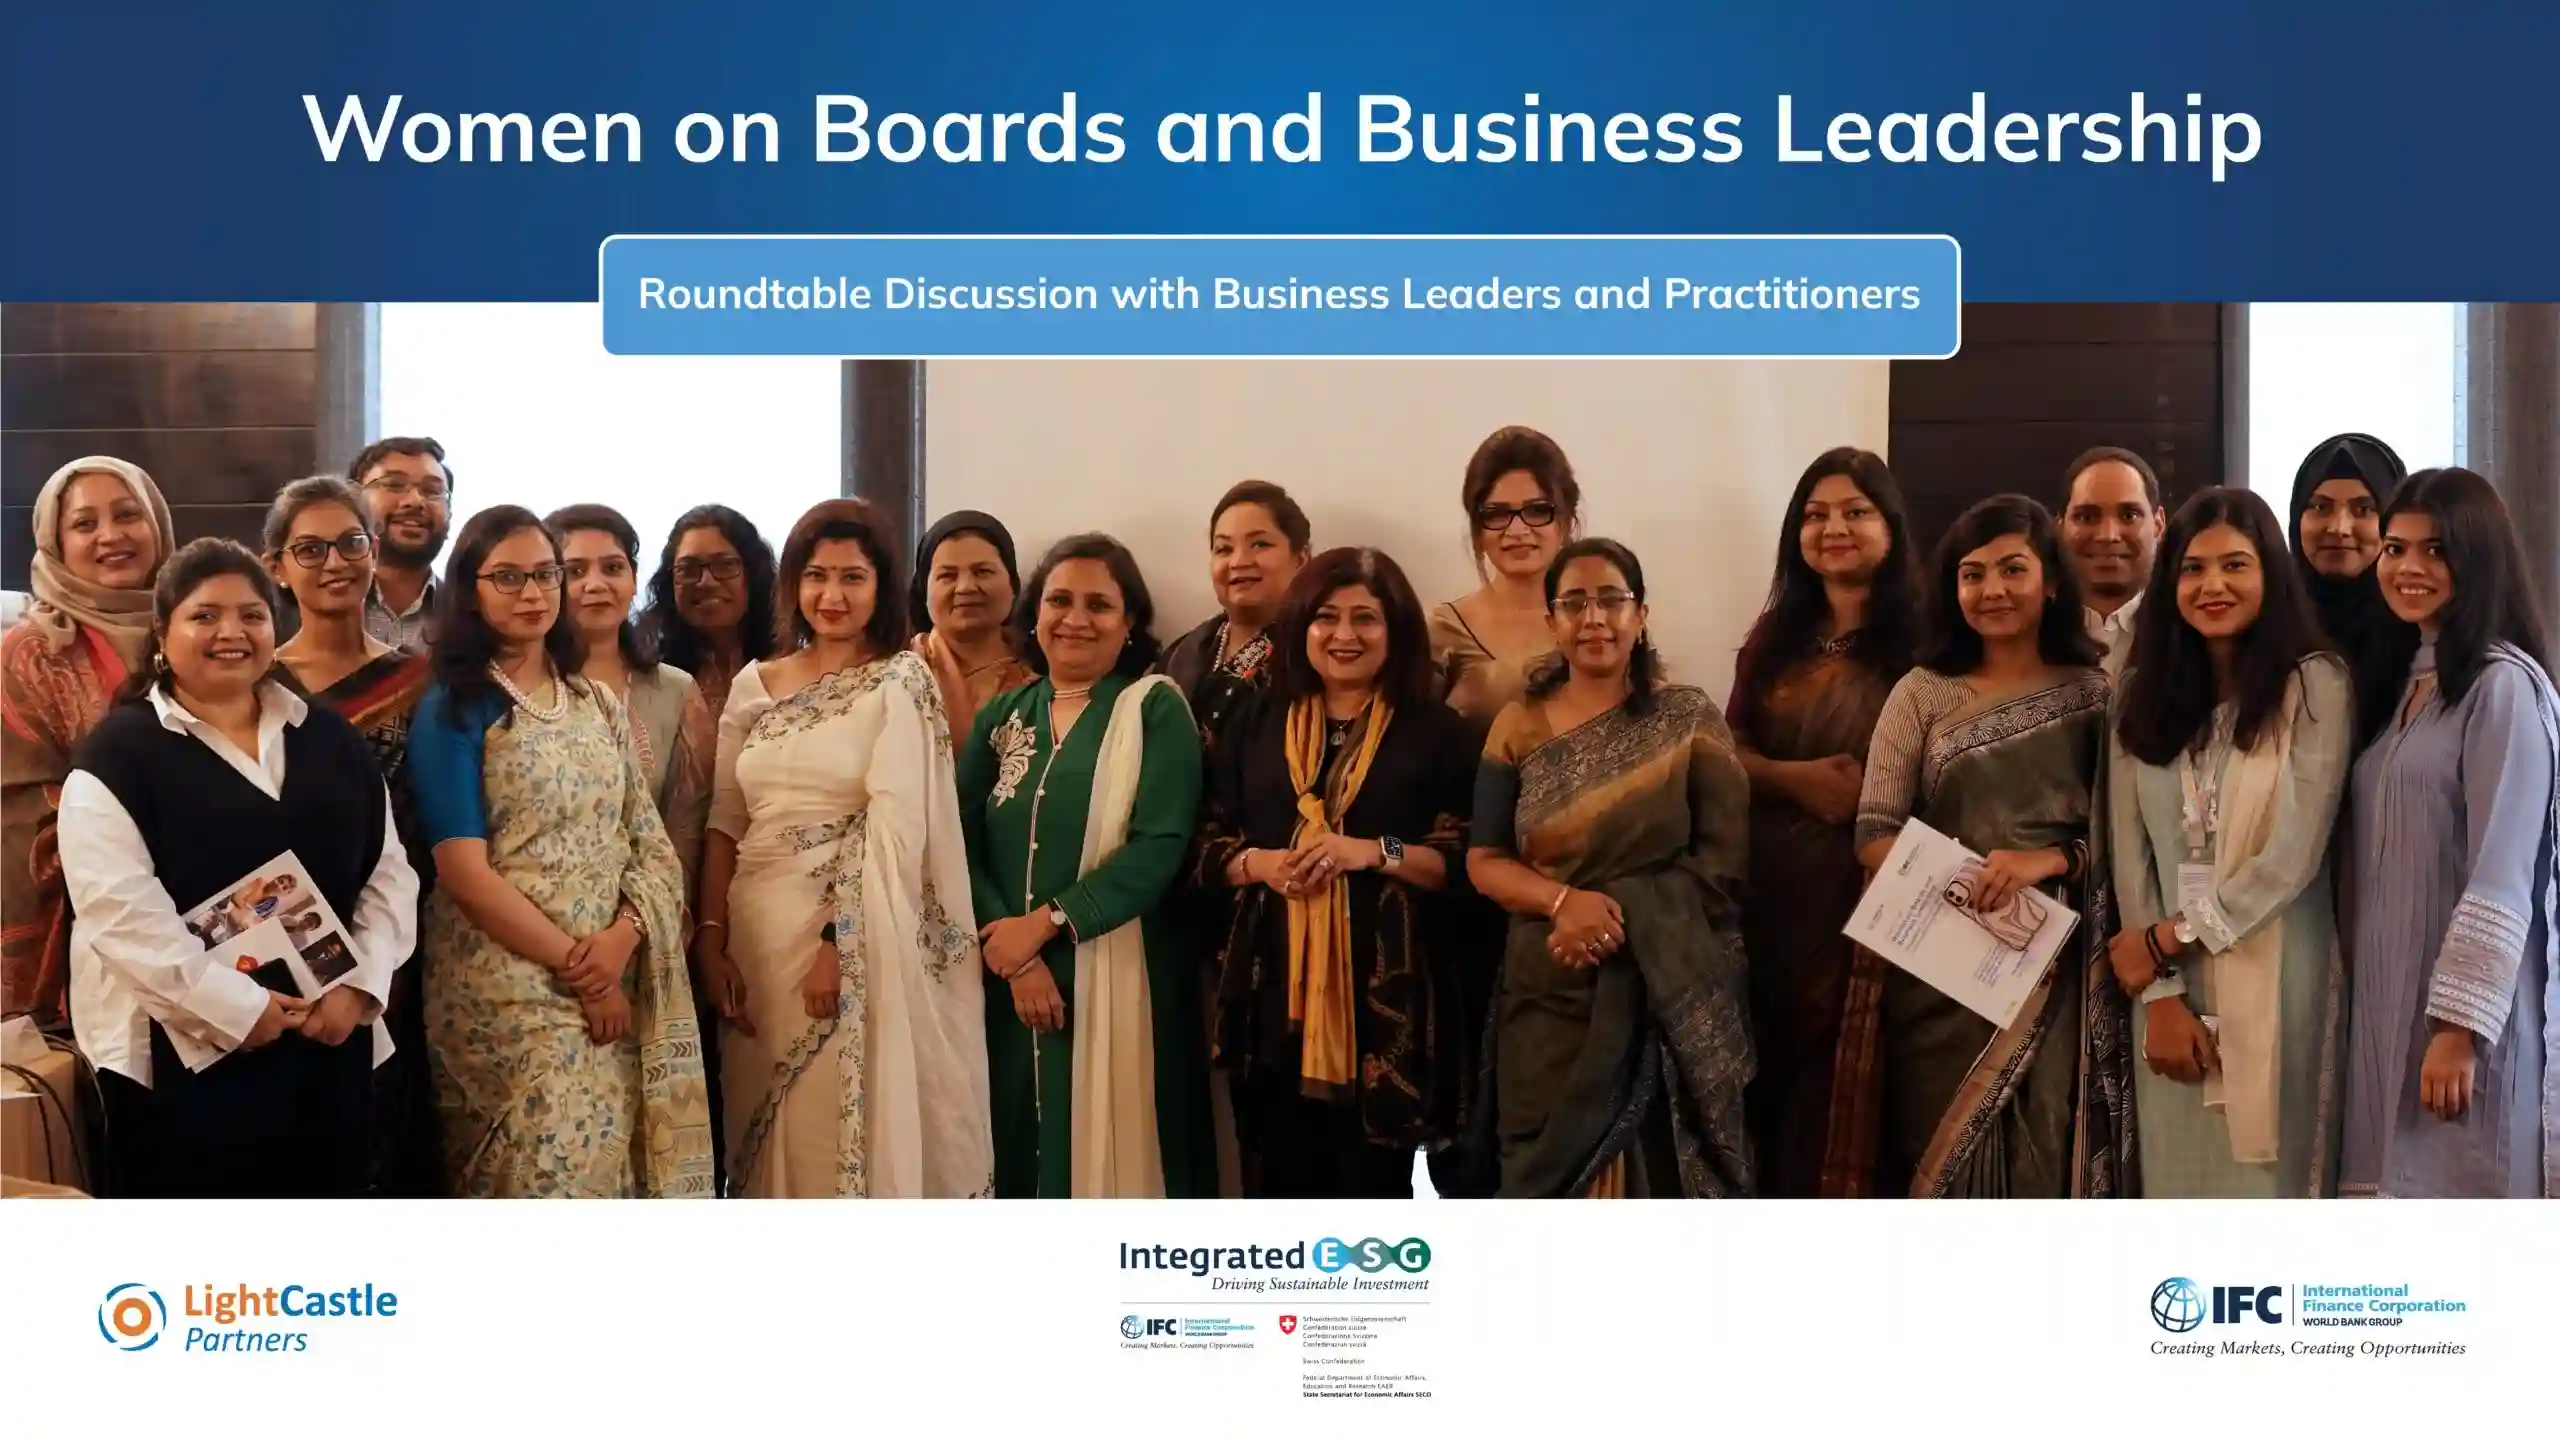 IFC-LightCastle, with the Embassy of Switzerland in Bangladesh, Co-organizes Roundtable with Women on Boards and Business Leadership